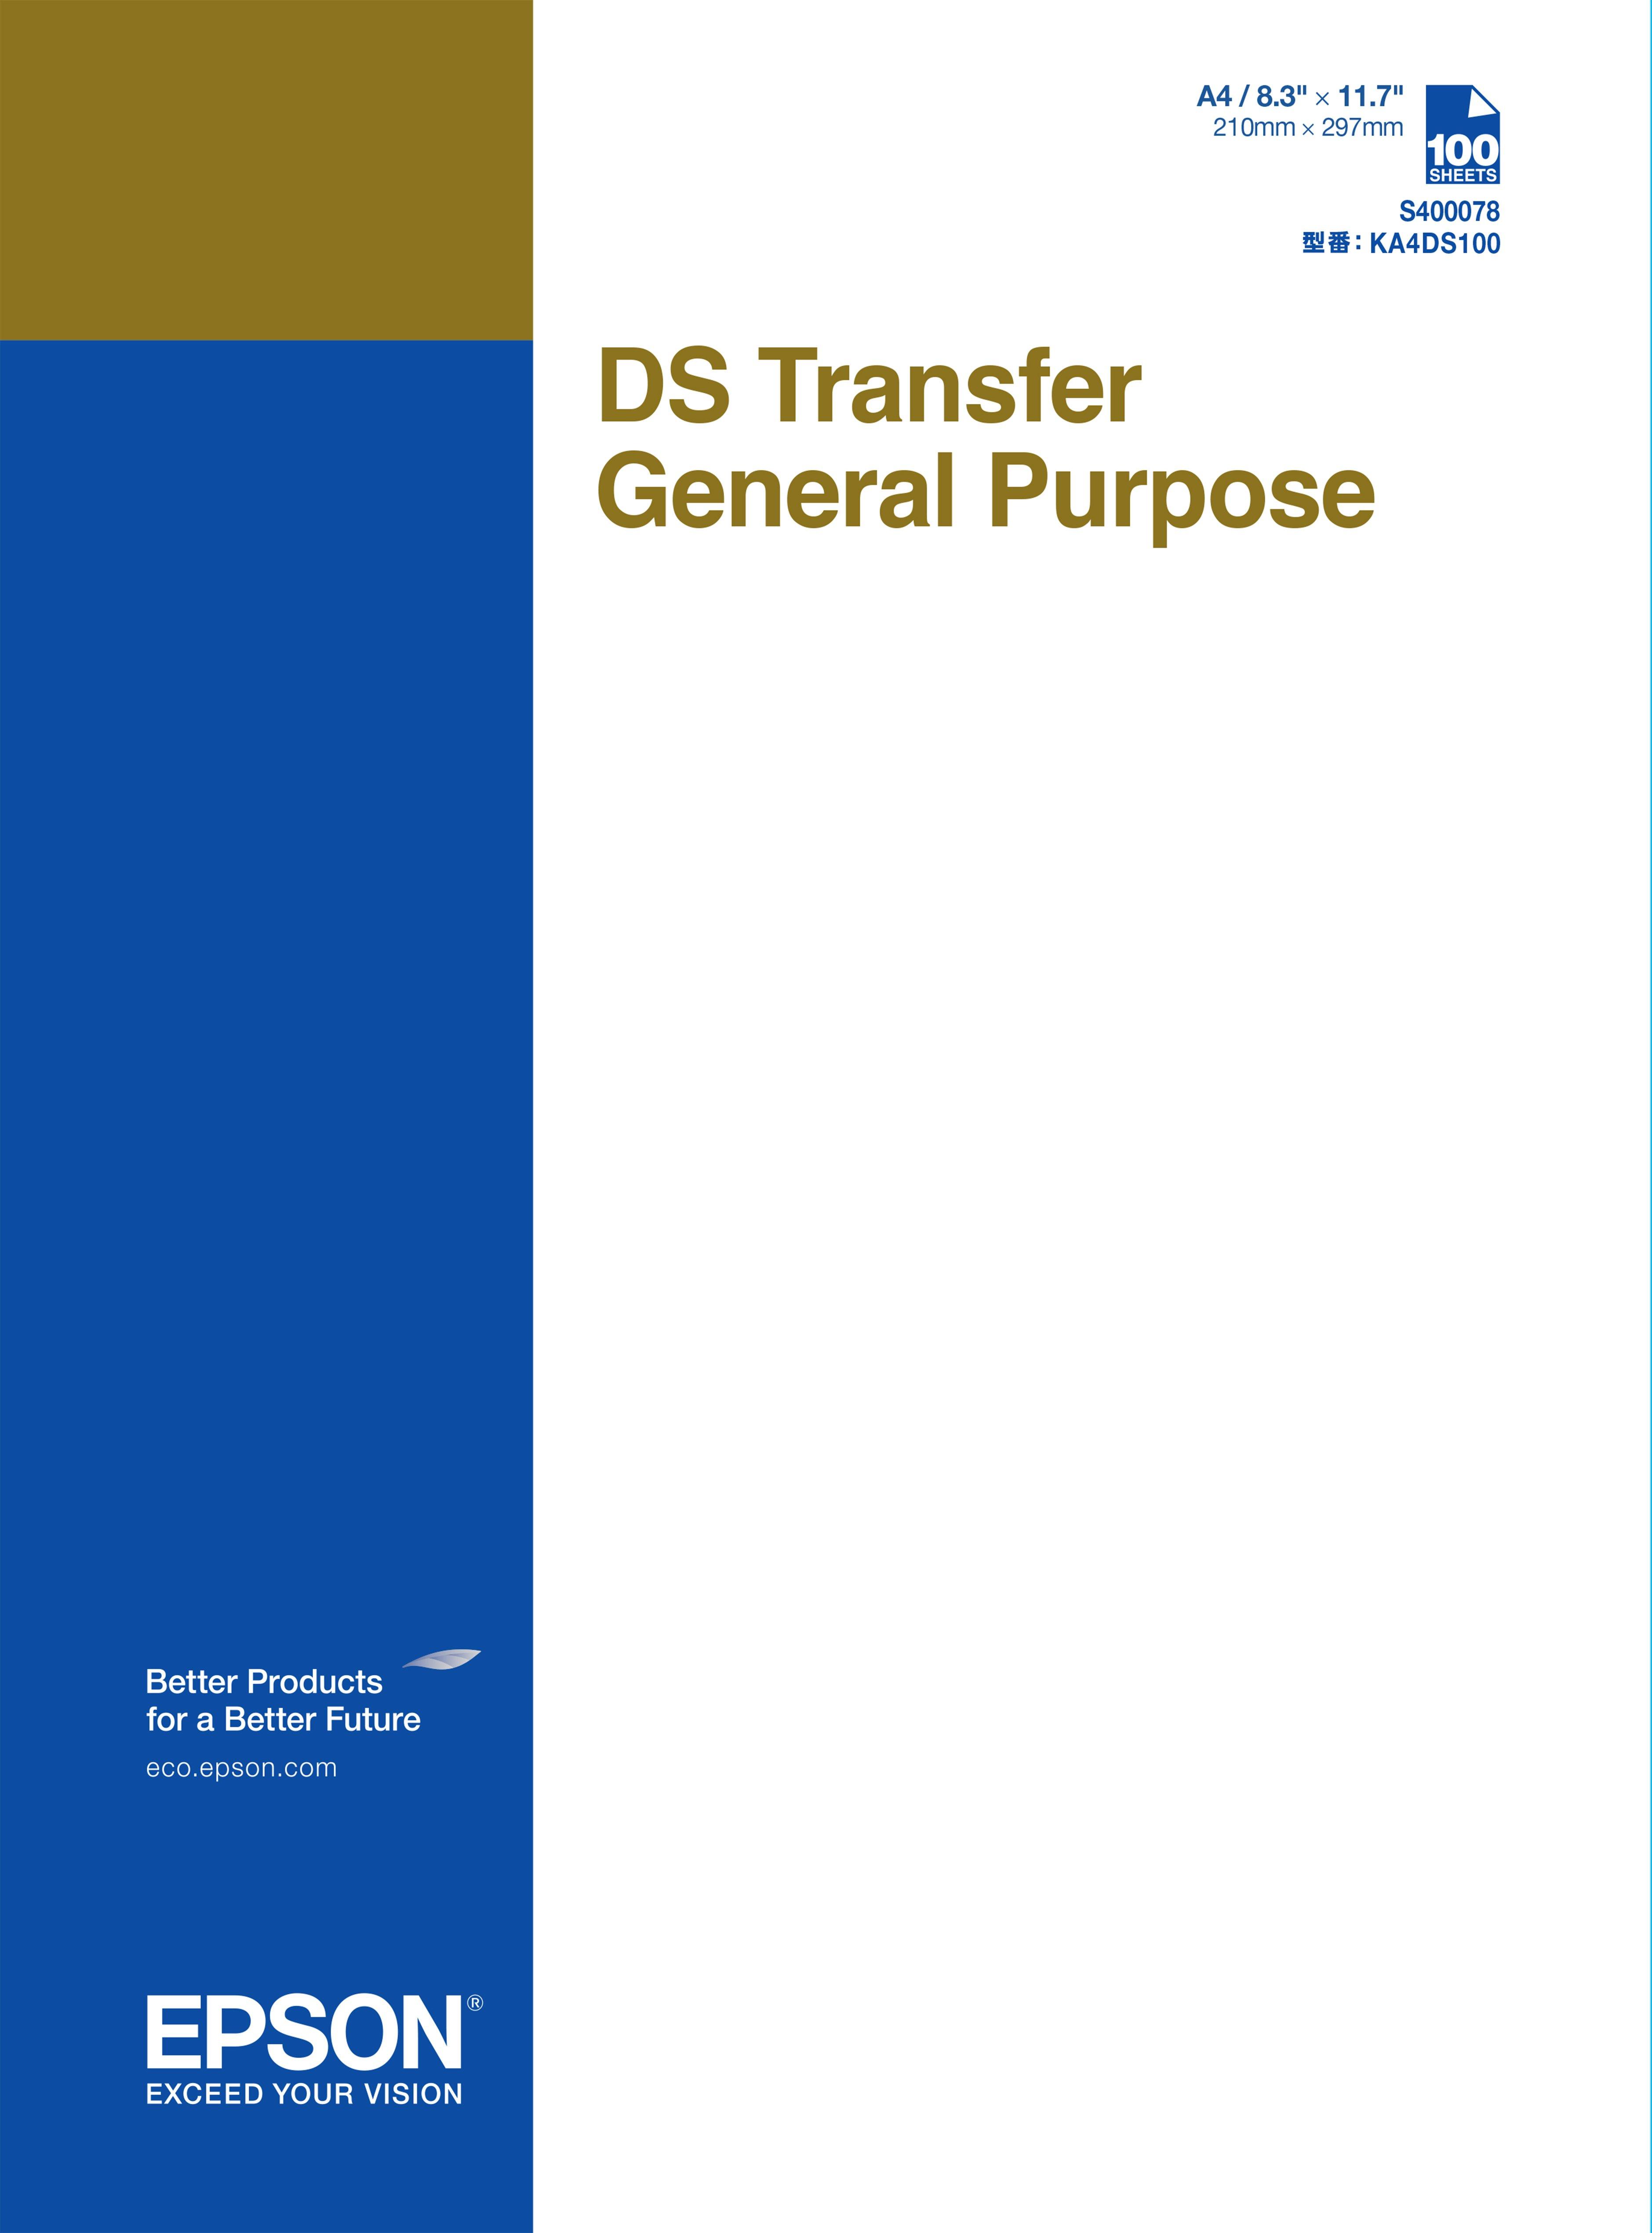 DS Transfer General Purpose sheets | Paper and Media | Ink & Paper | | Epson